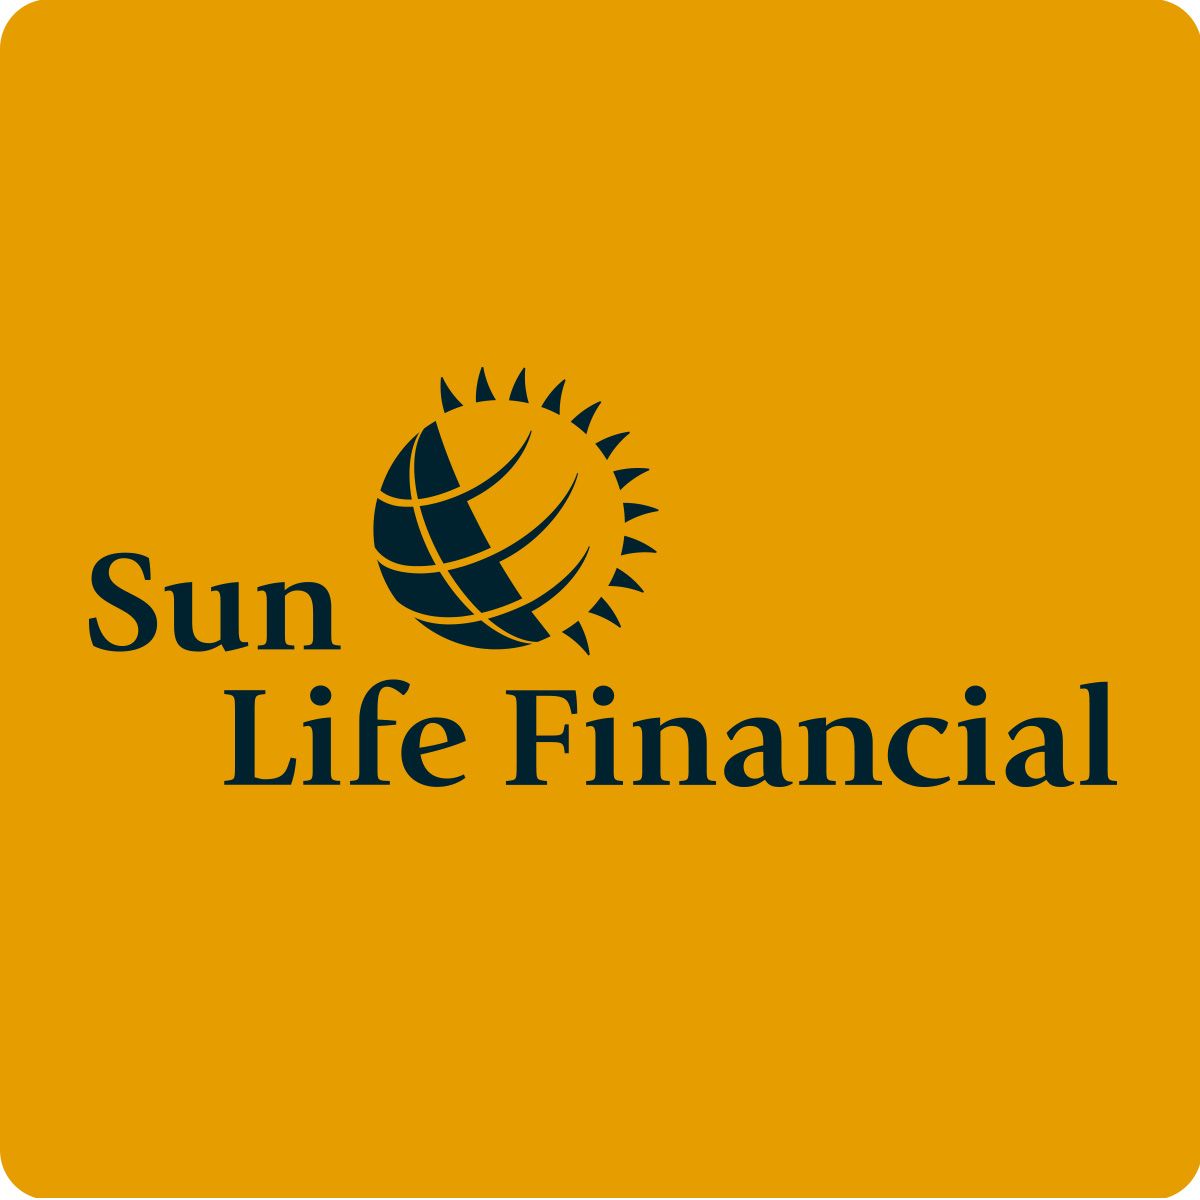 Sun Life Financial can help you build and protect your.